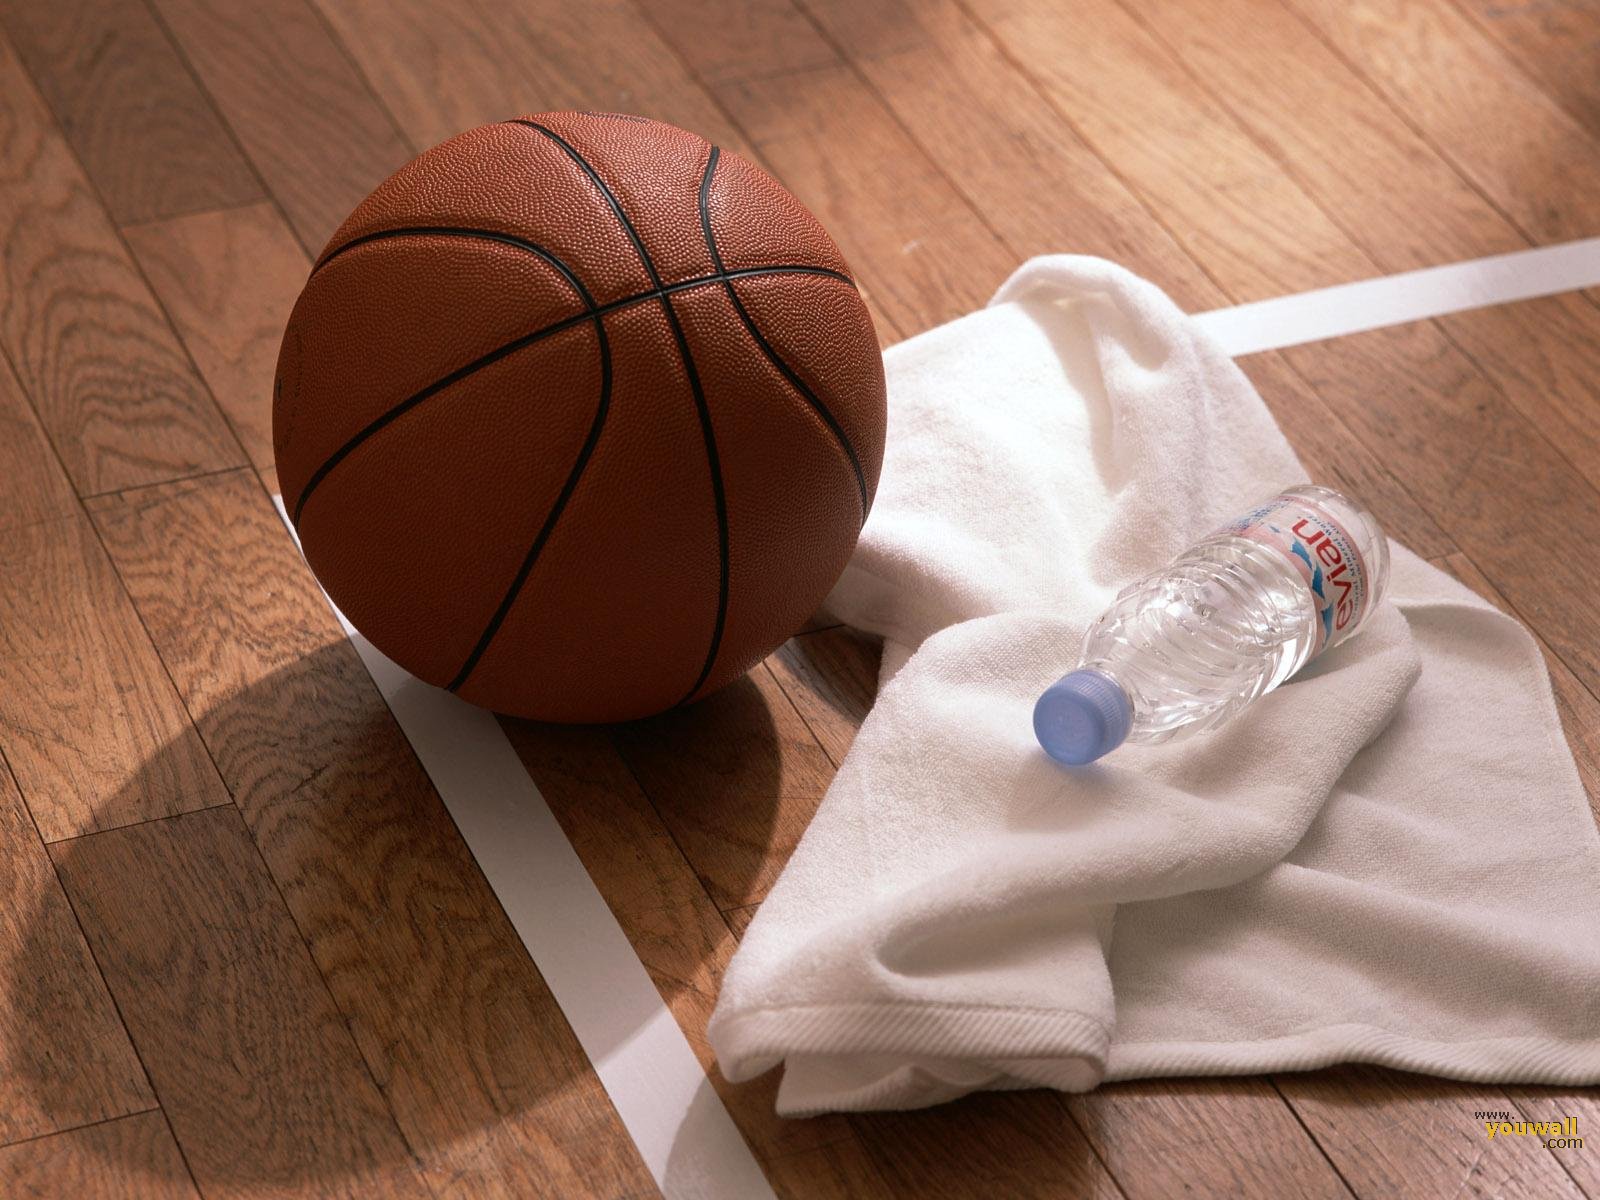 basket ball Wallpaper and Background Image | 1600x1200